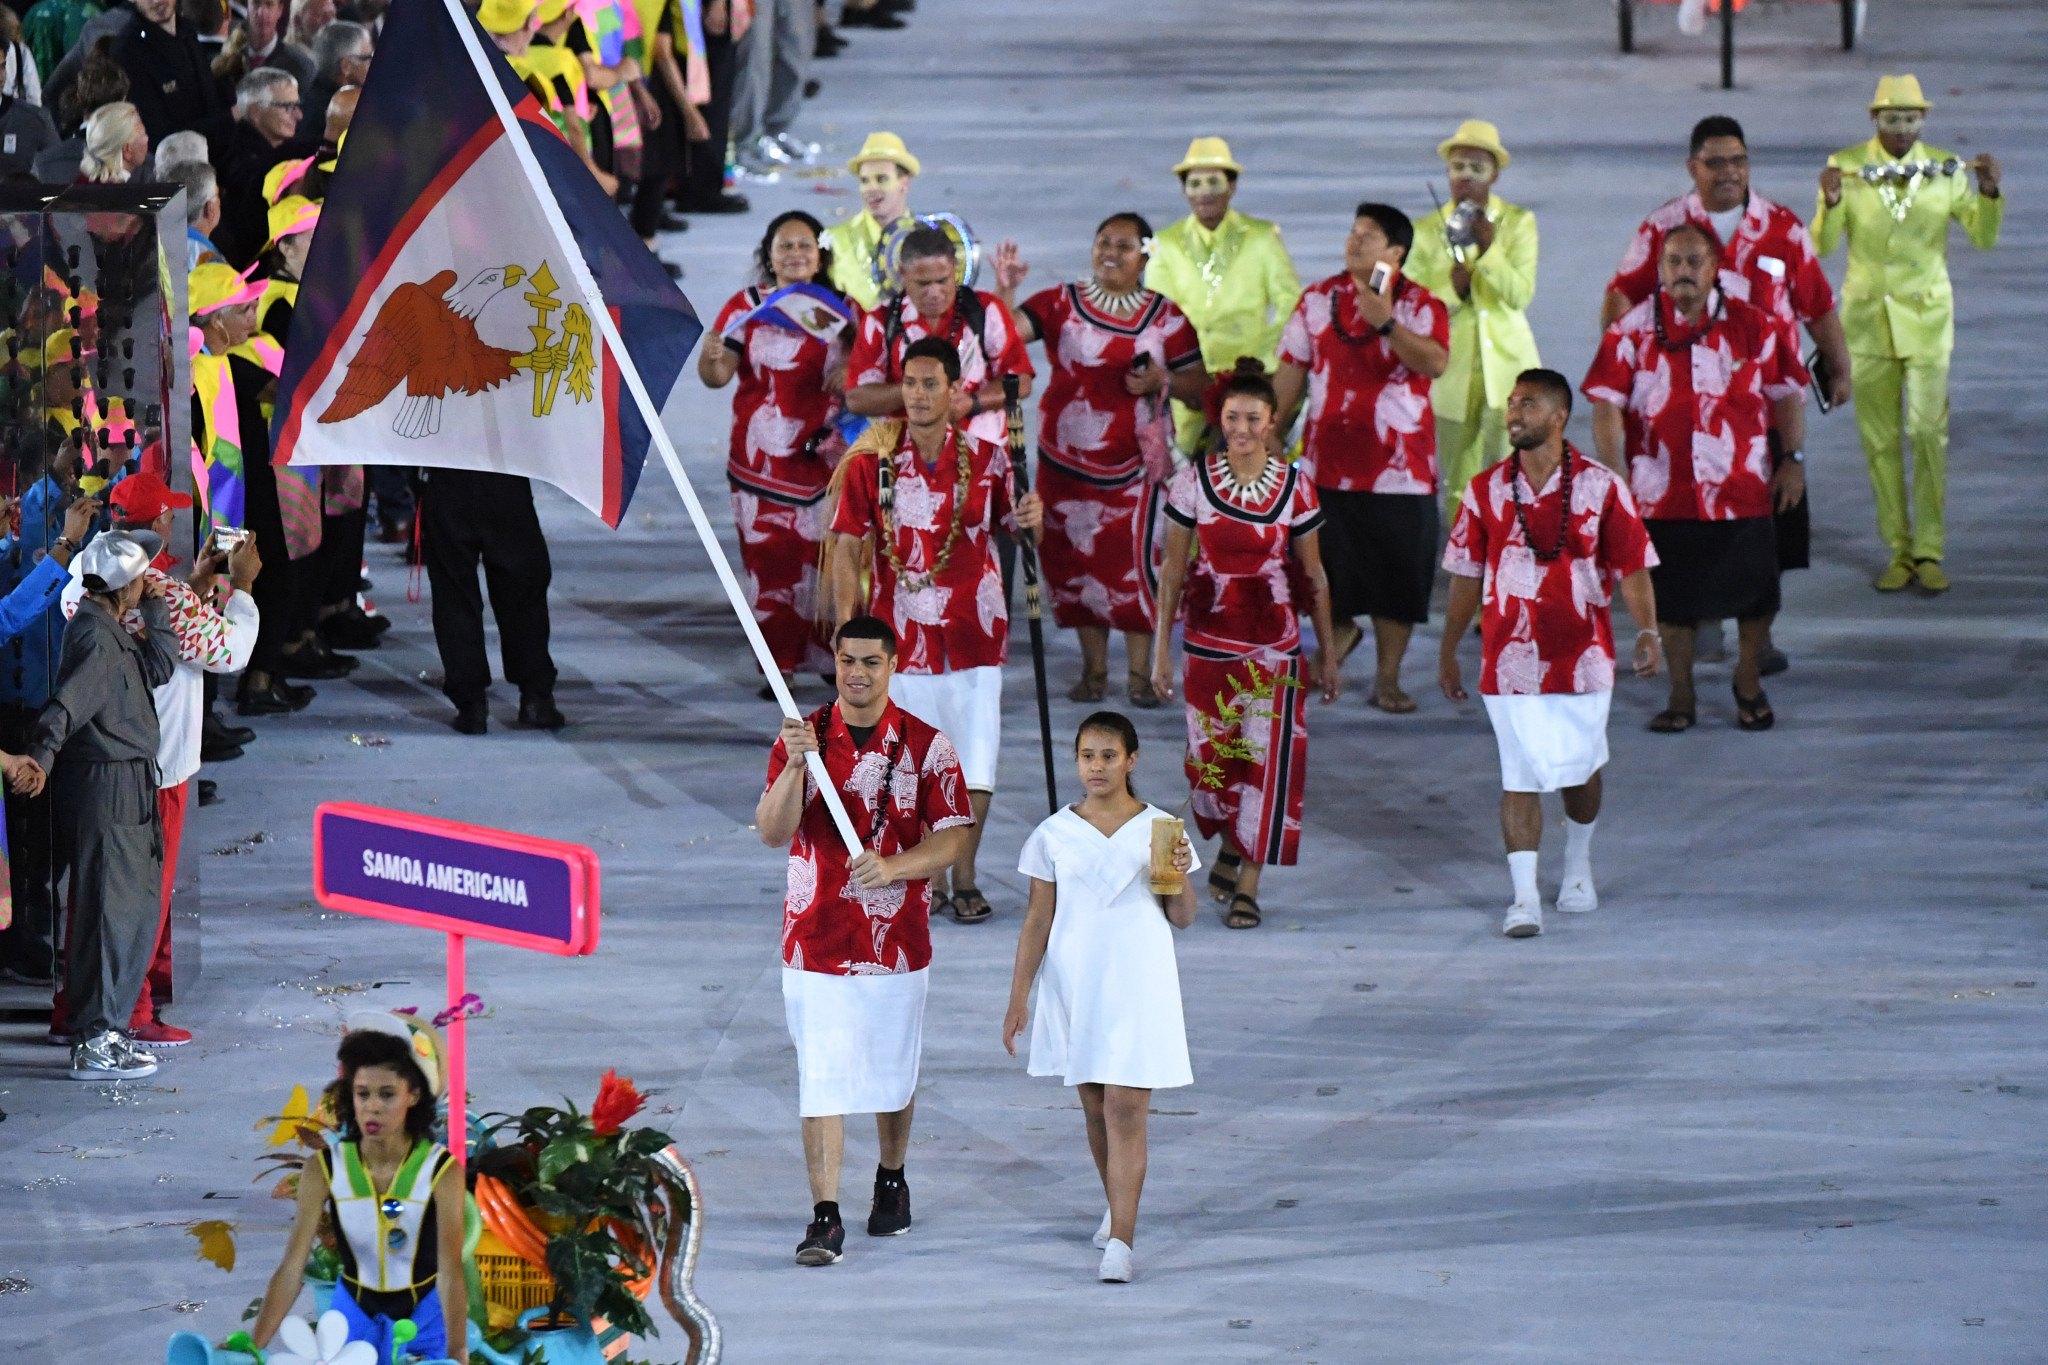 American Samoa has competed at every Summer Olympics since 1988 ©Getty Images